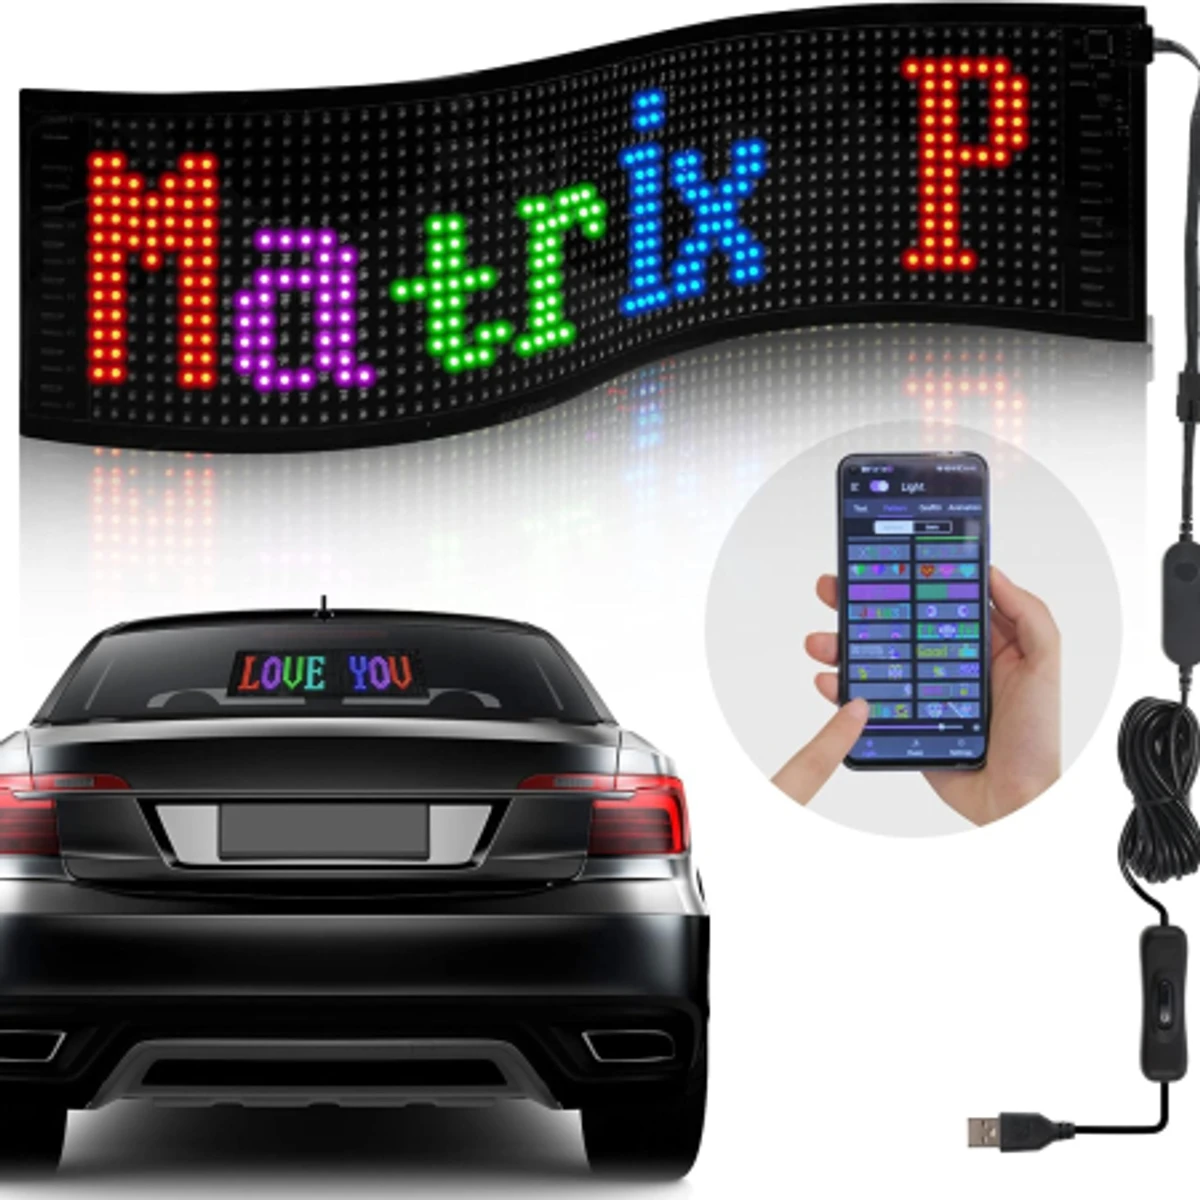 Flexible USB LED Car Sign App-controlled Car Light Sign customizable text patterns and animations Perfect for cars, stores, bars, and hotels